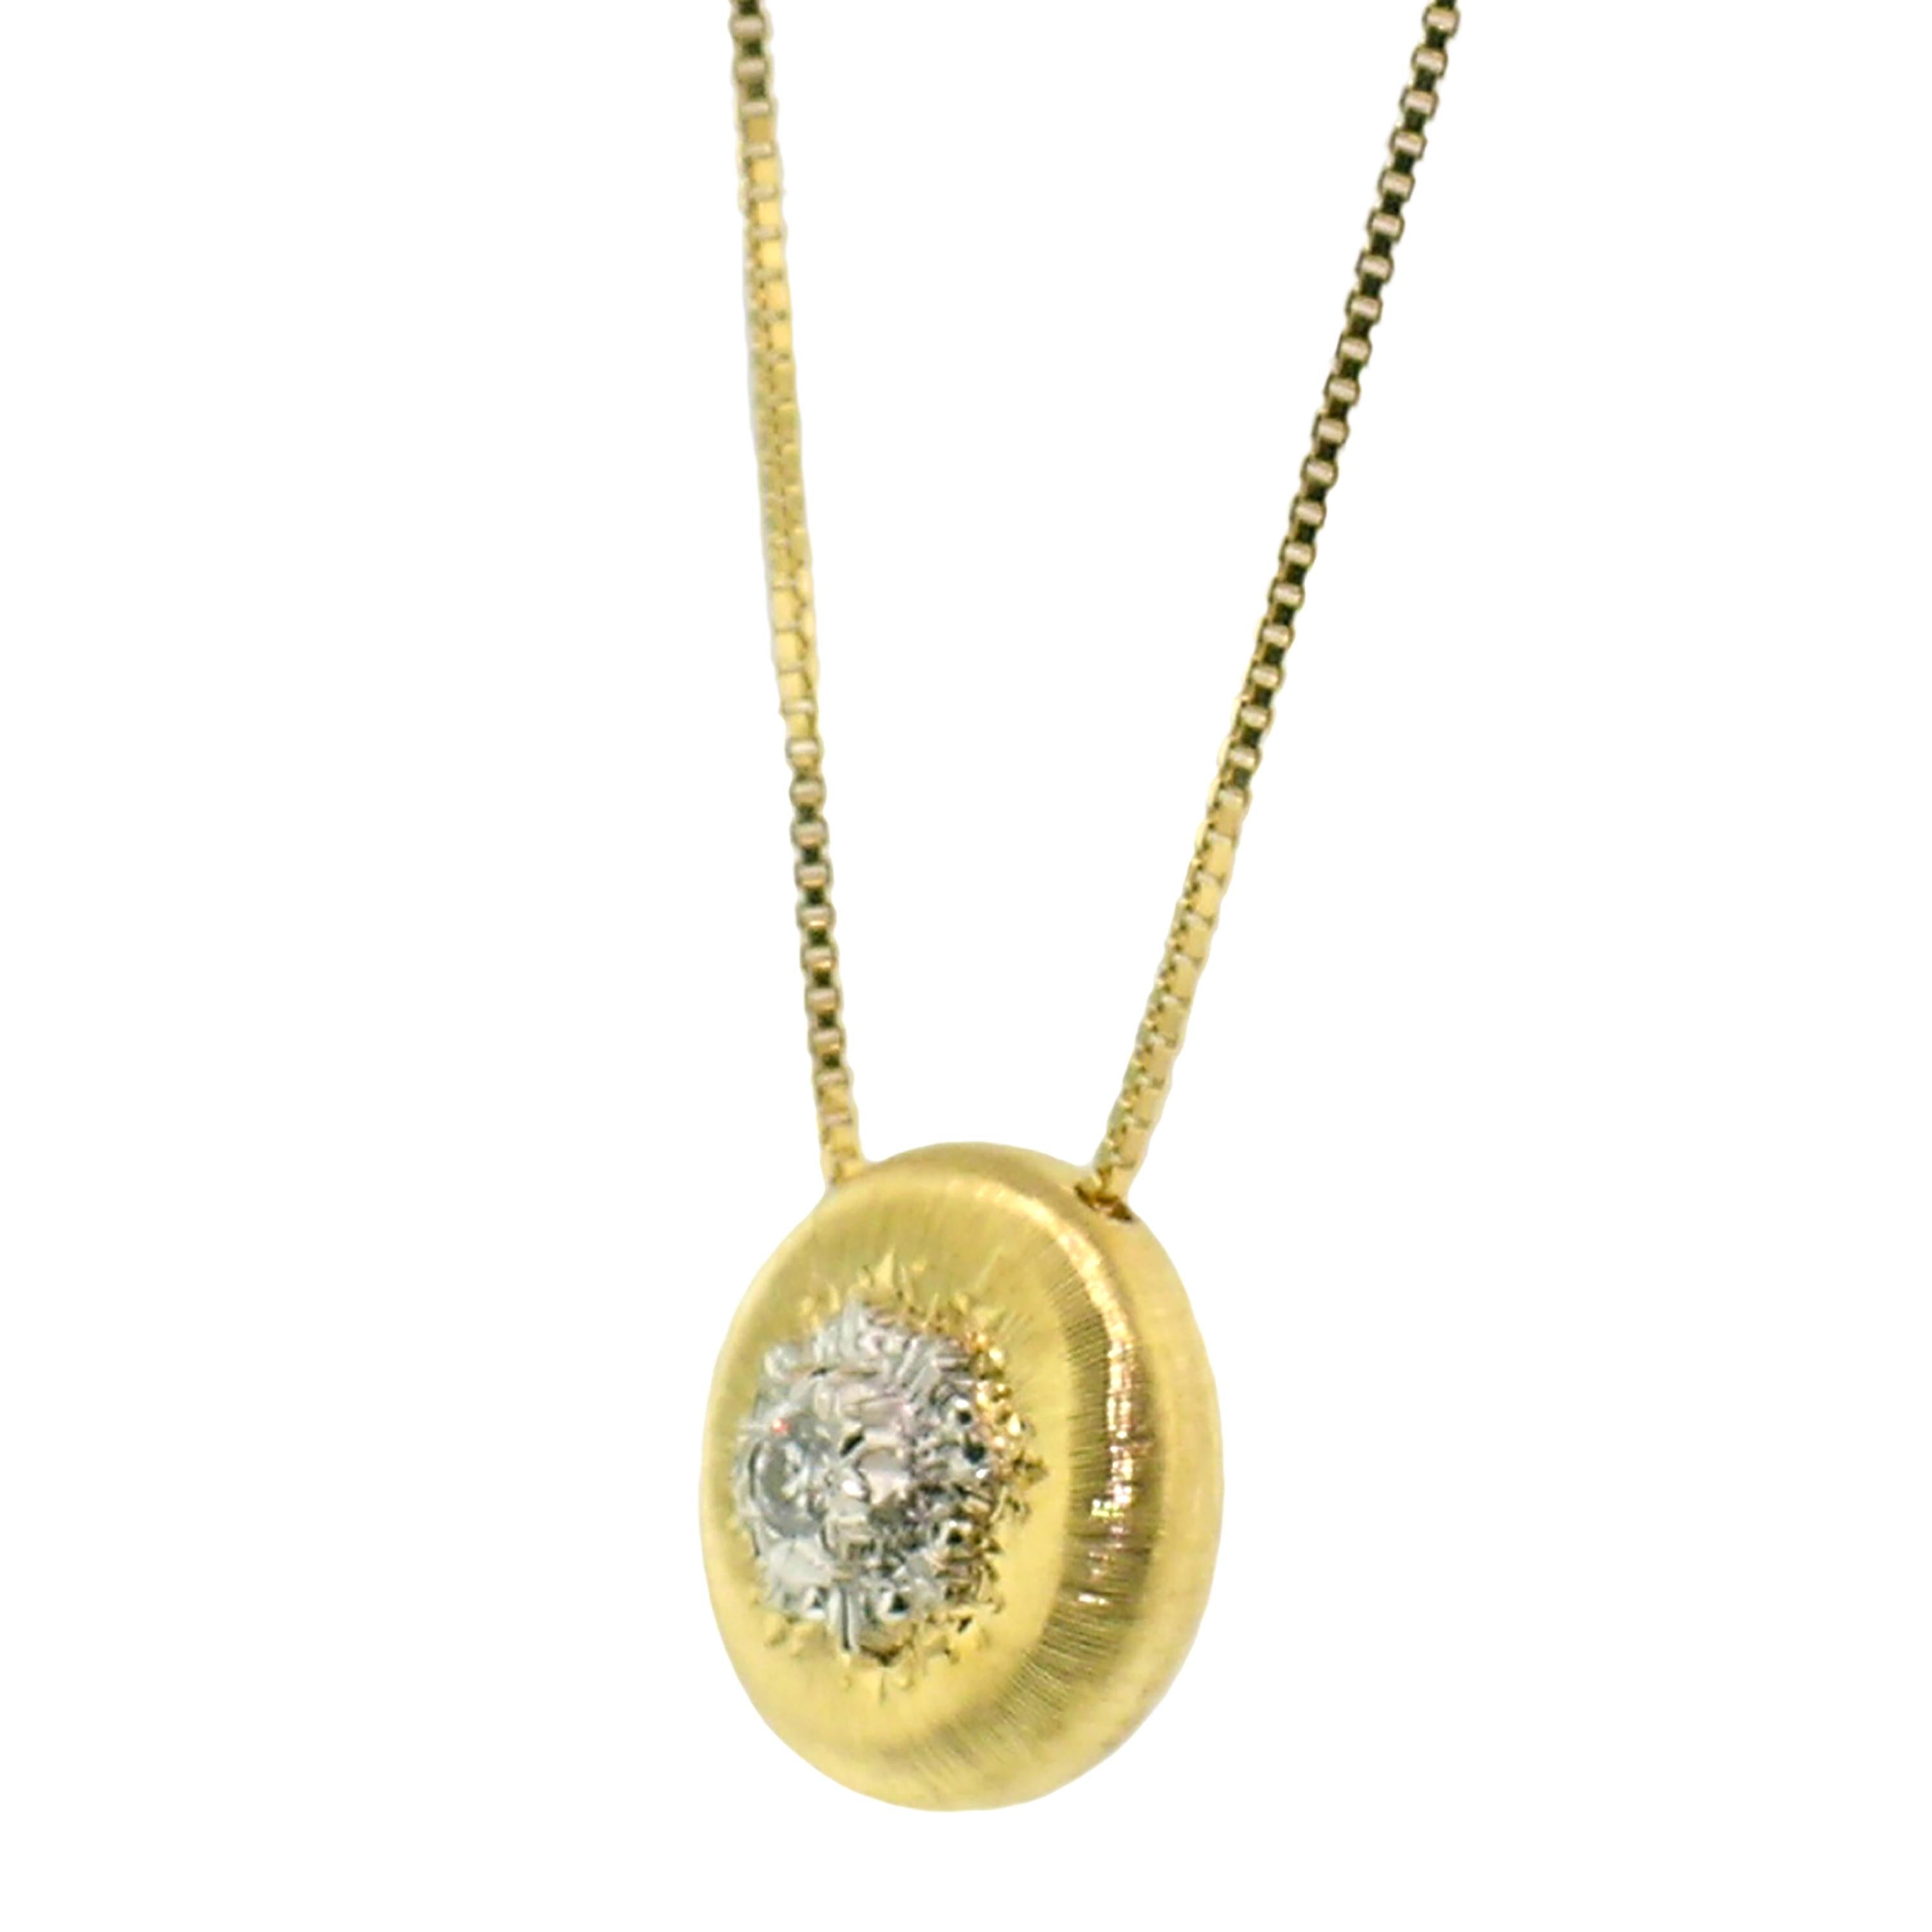 Round Cut 18kt Gold and Diamond Pendant Necklace, Handmade and Hand Engraved in Italy